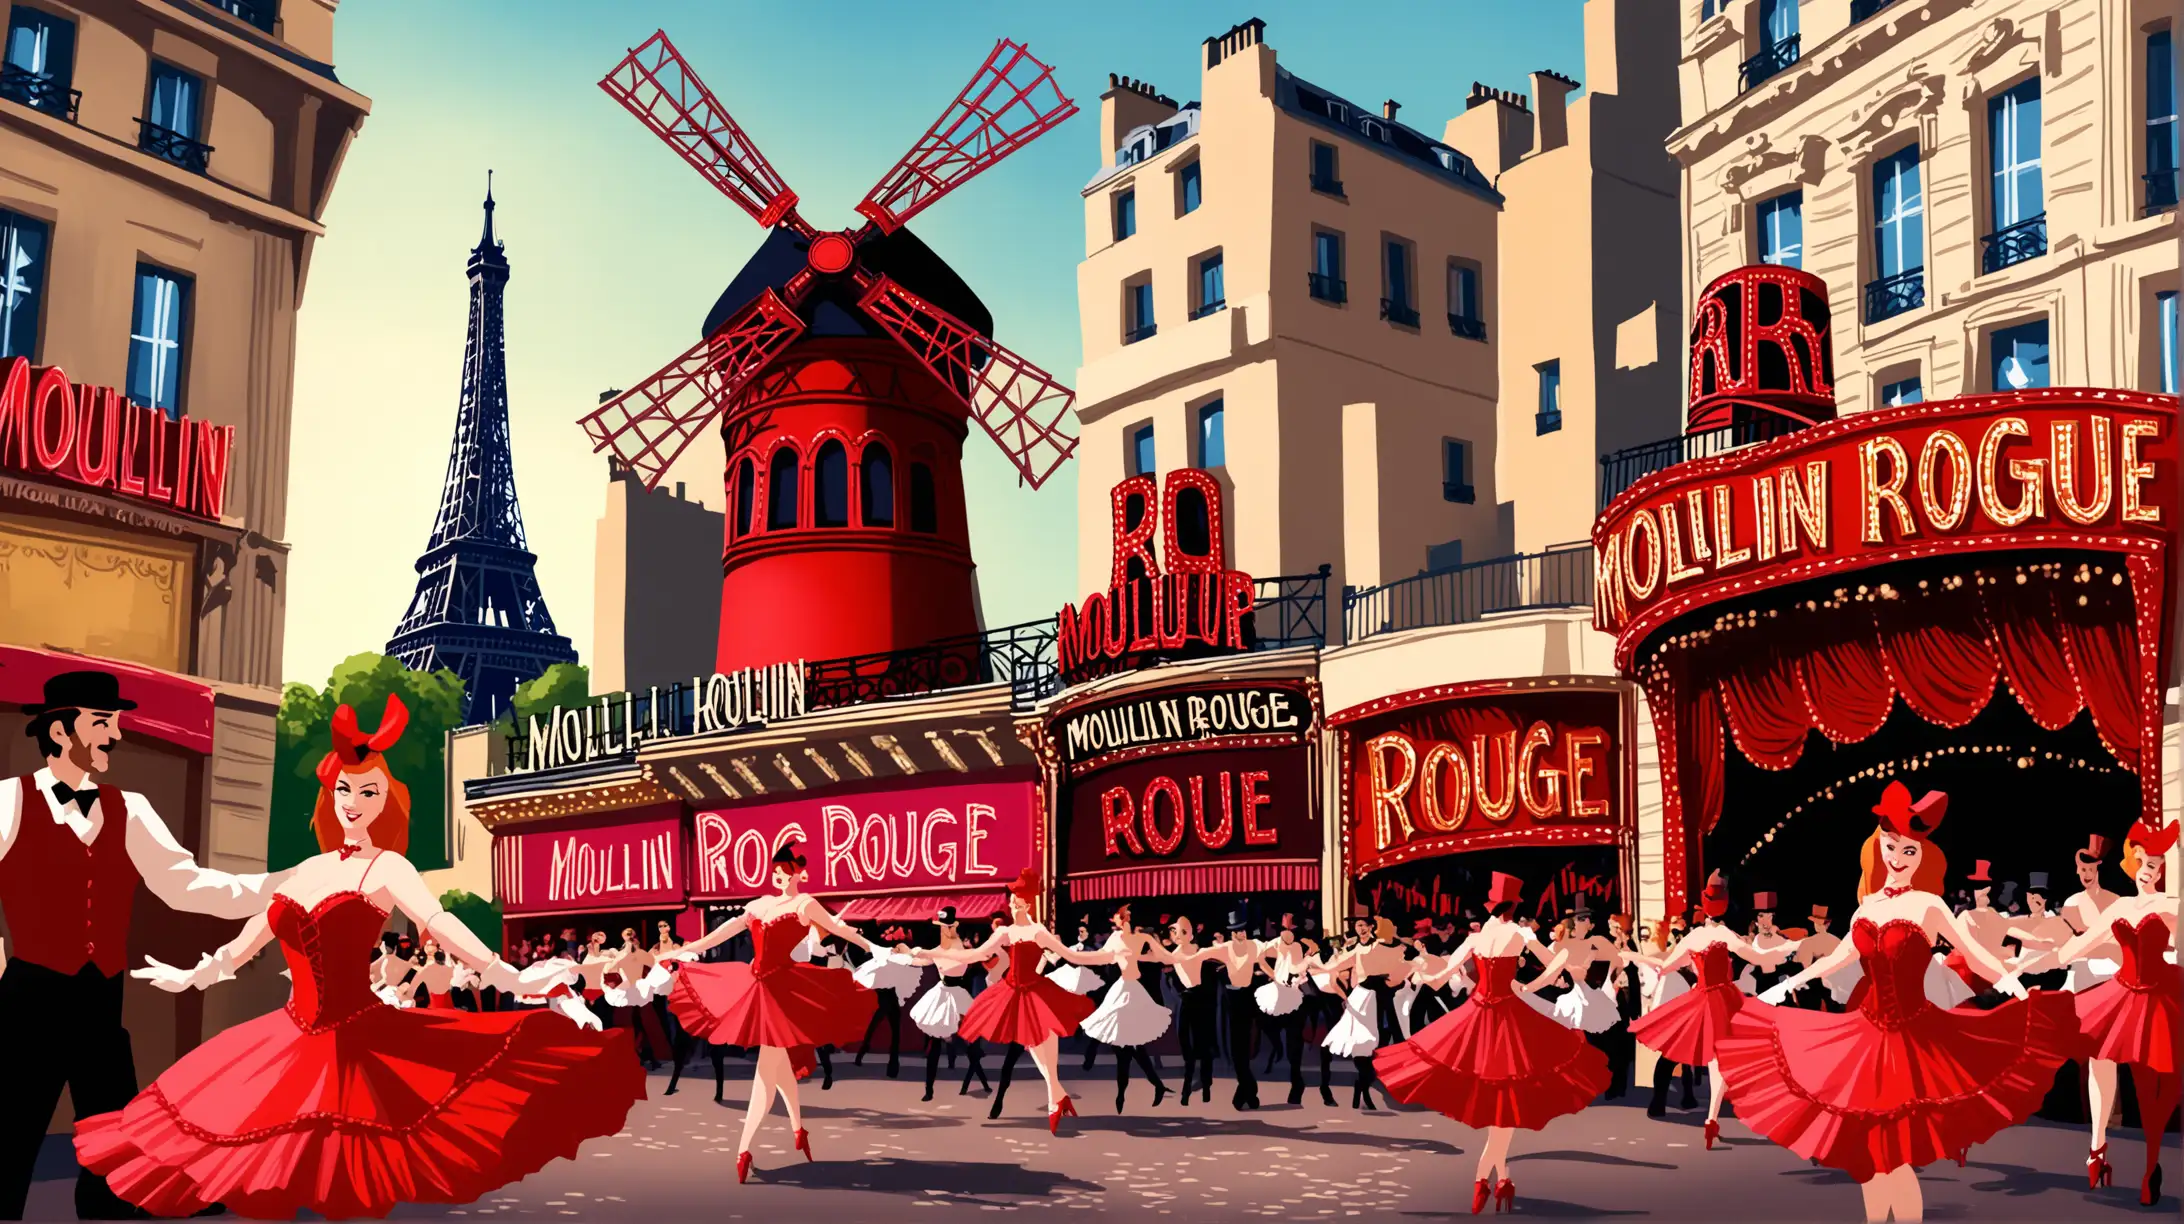 Traditional Moulin Rouge with Eiffel Tower Backdrop and CanCan Dancers